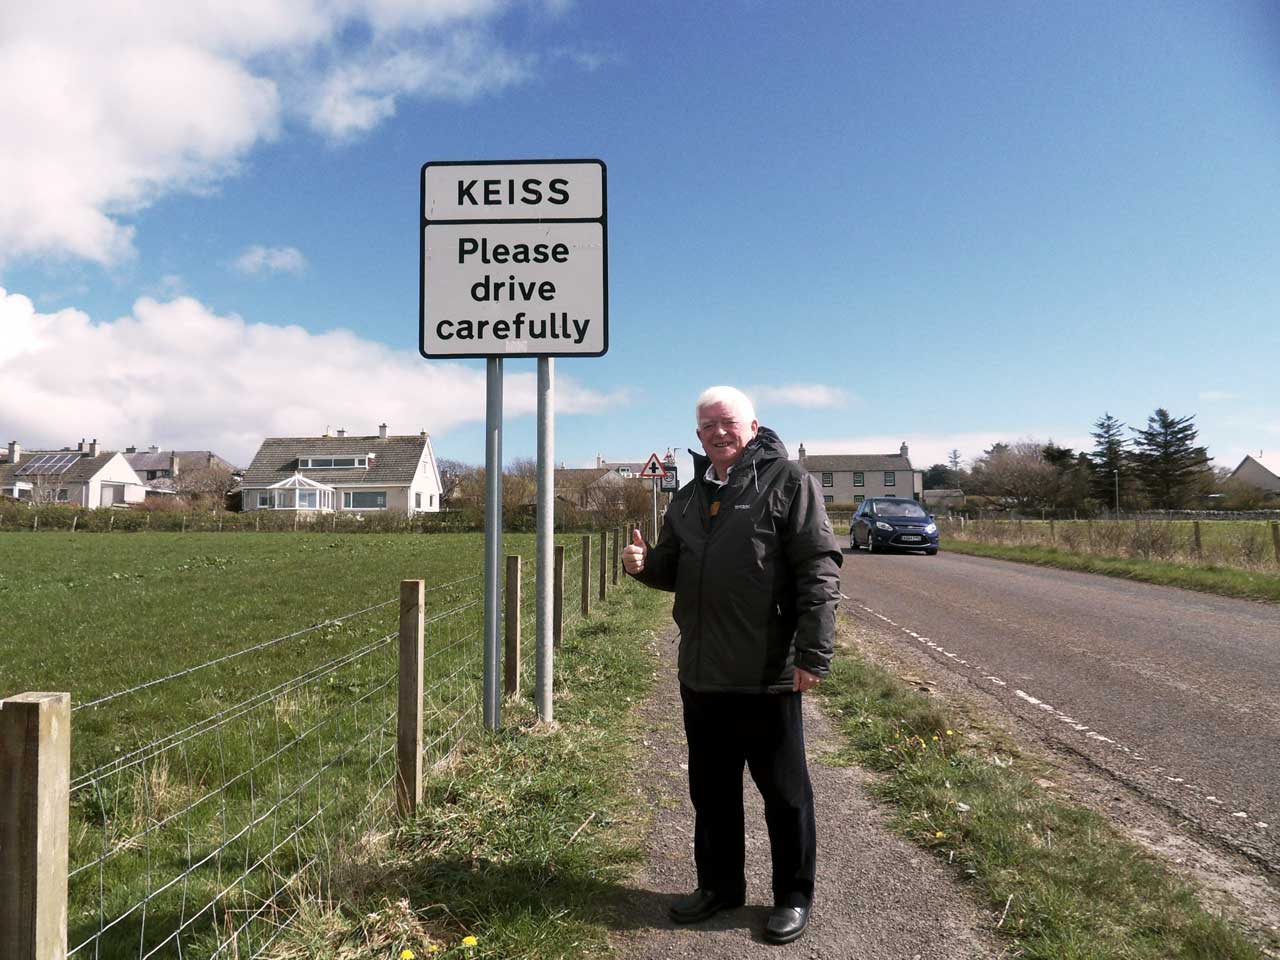 Photo: Keiss in The Spring Sunshine Appreciated By Bill On the Campaign Trail